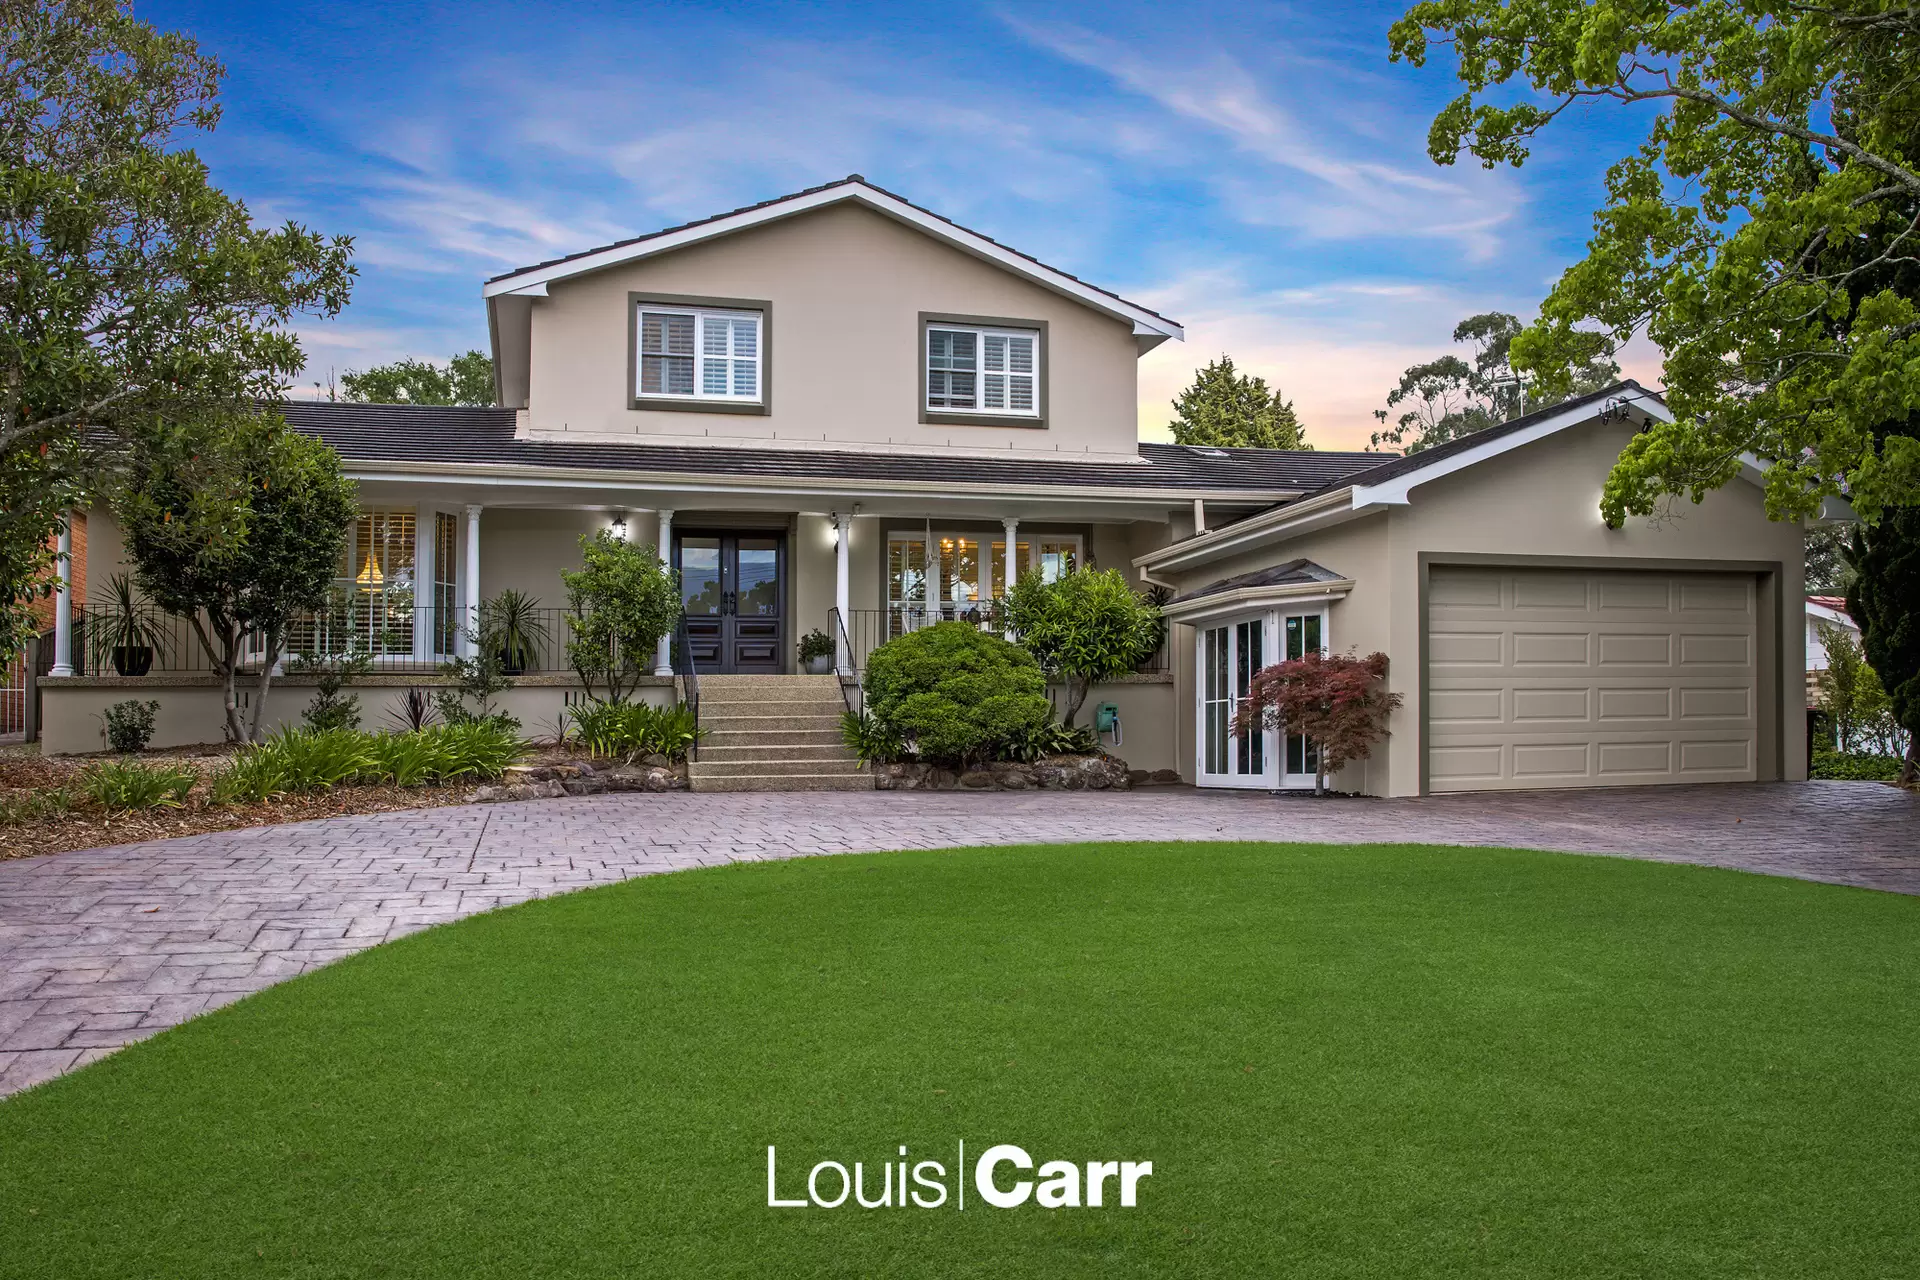 Photo #1: 47 Cambewarra Avenue, Castle Hill - For Sale by Louis Carr Real Estate